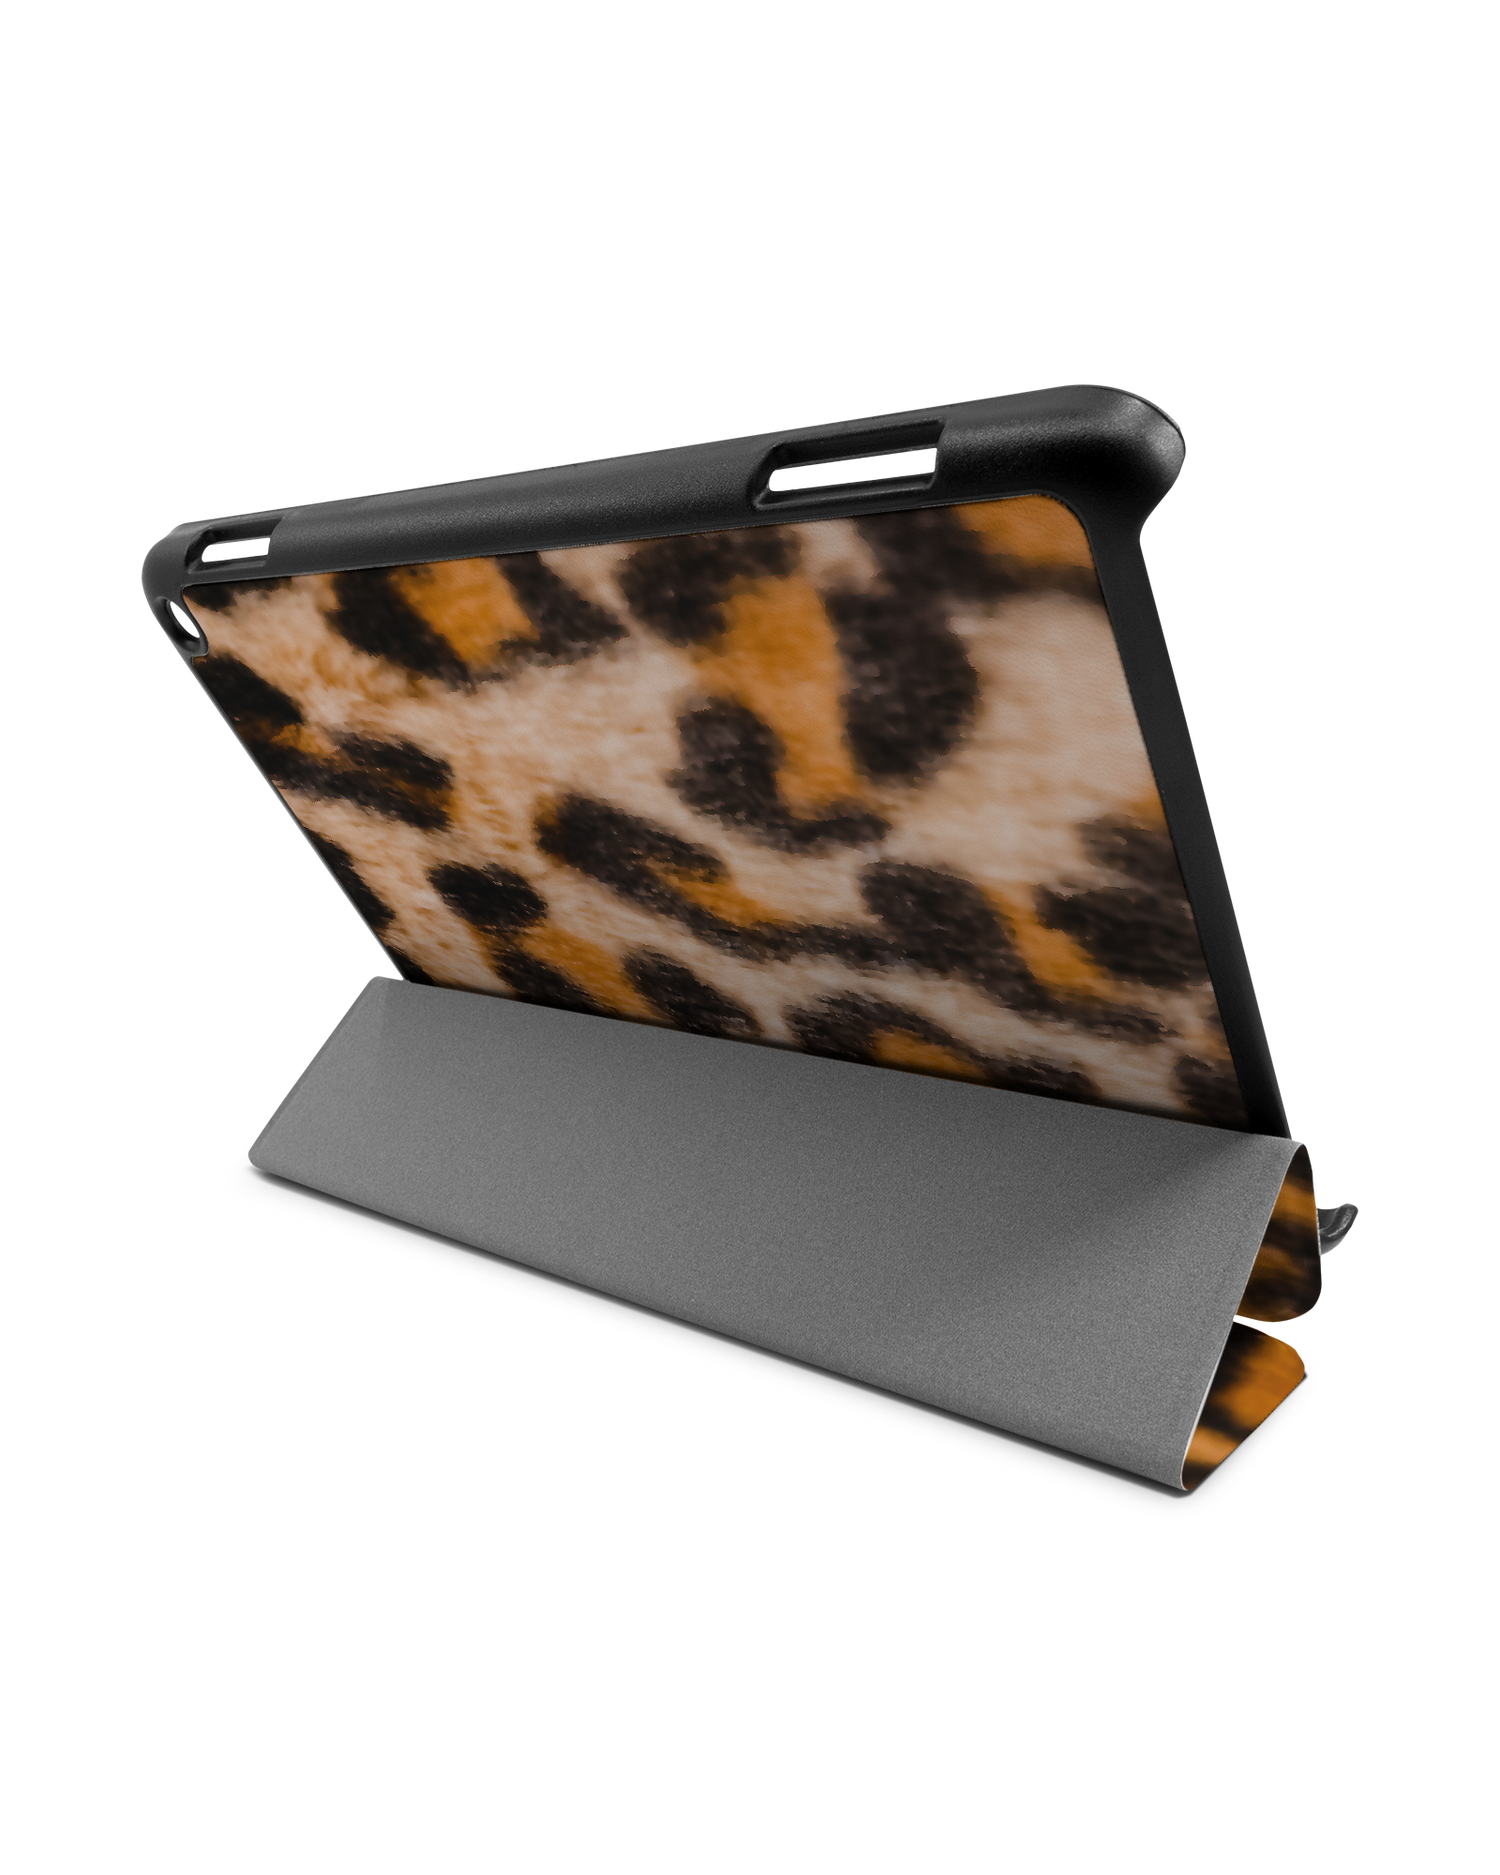 Leopard Pattern Tablet Smart Case for Amazon Fire HD 8 (2022), Amazon Fire HD 8 Plus (2022), Amazon Fire HD 8 (2020), Amazon Fire HD 8 Plus (2020): Used as Stand